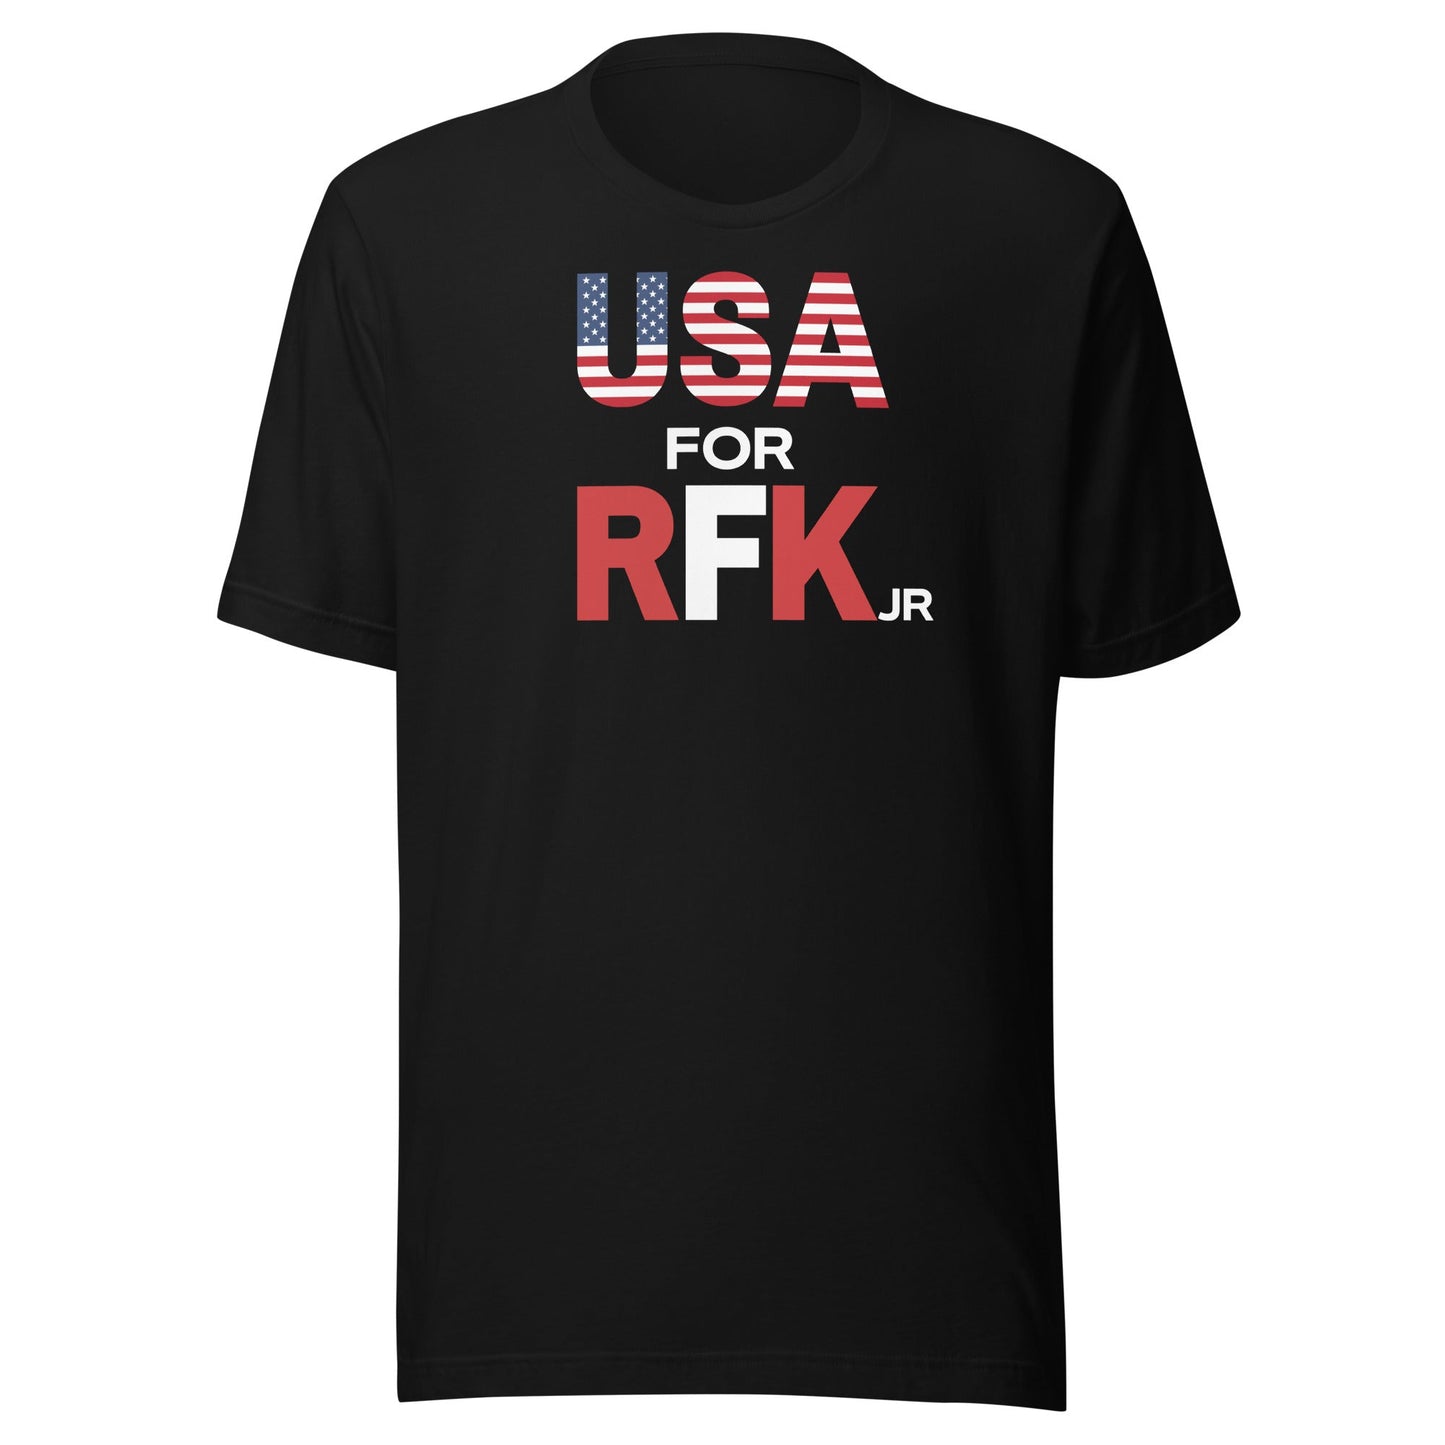 USA for RFK JR Unisex Tee - TEAM KENNEDY. All rights reserved